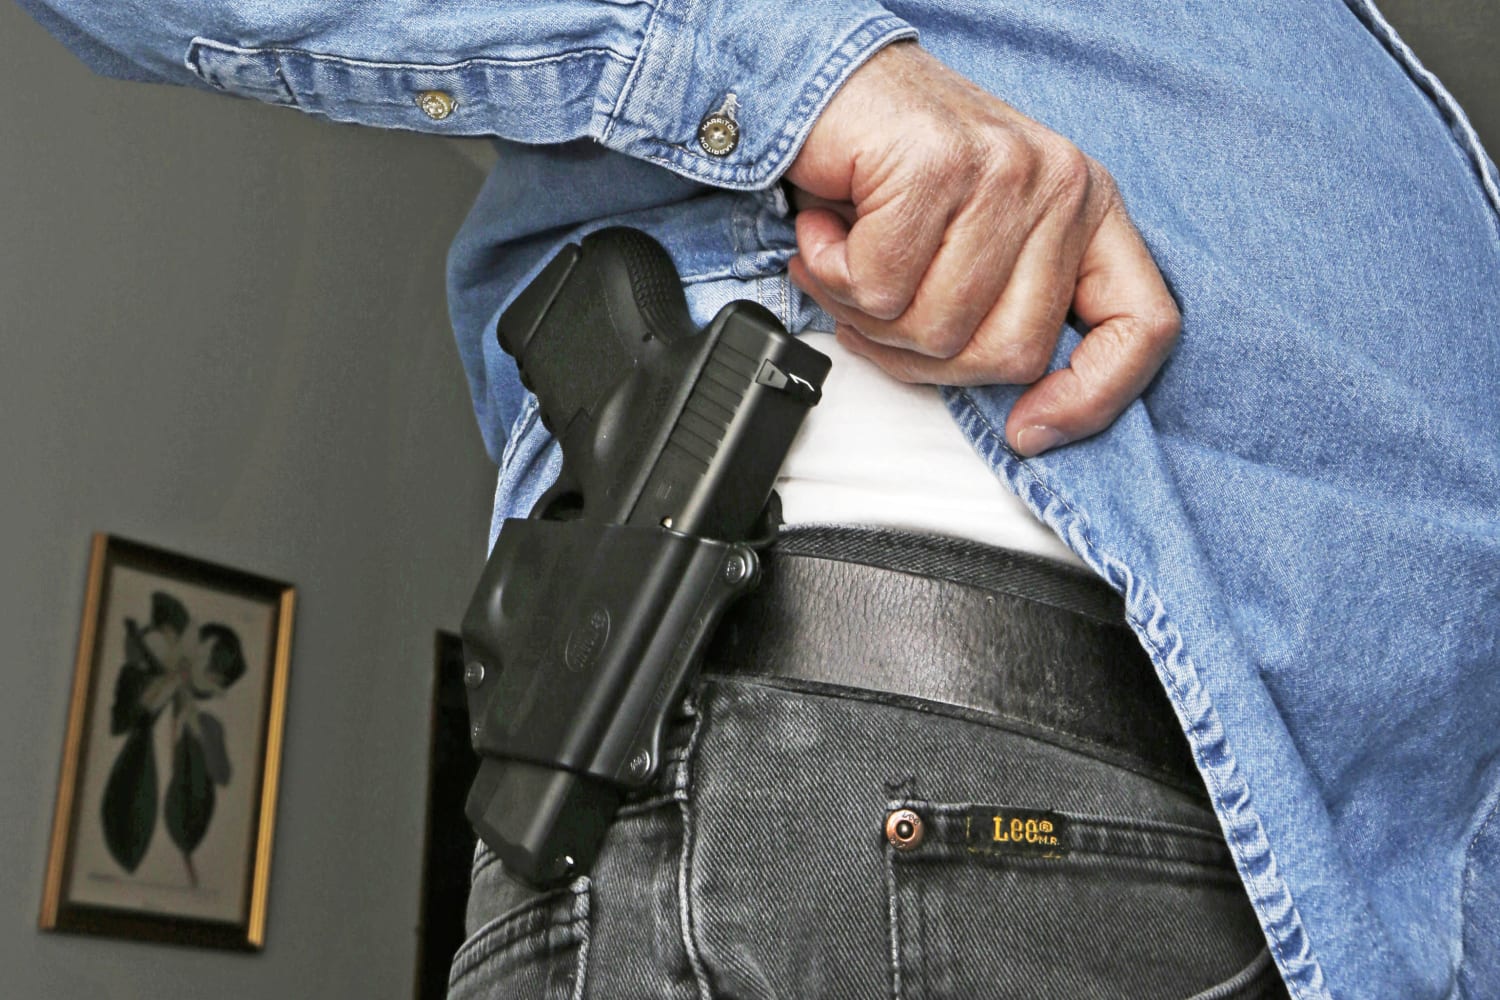 Ohio Gov. Mike DeWine signs bill allowing permitless concealed carry